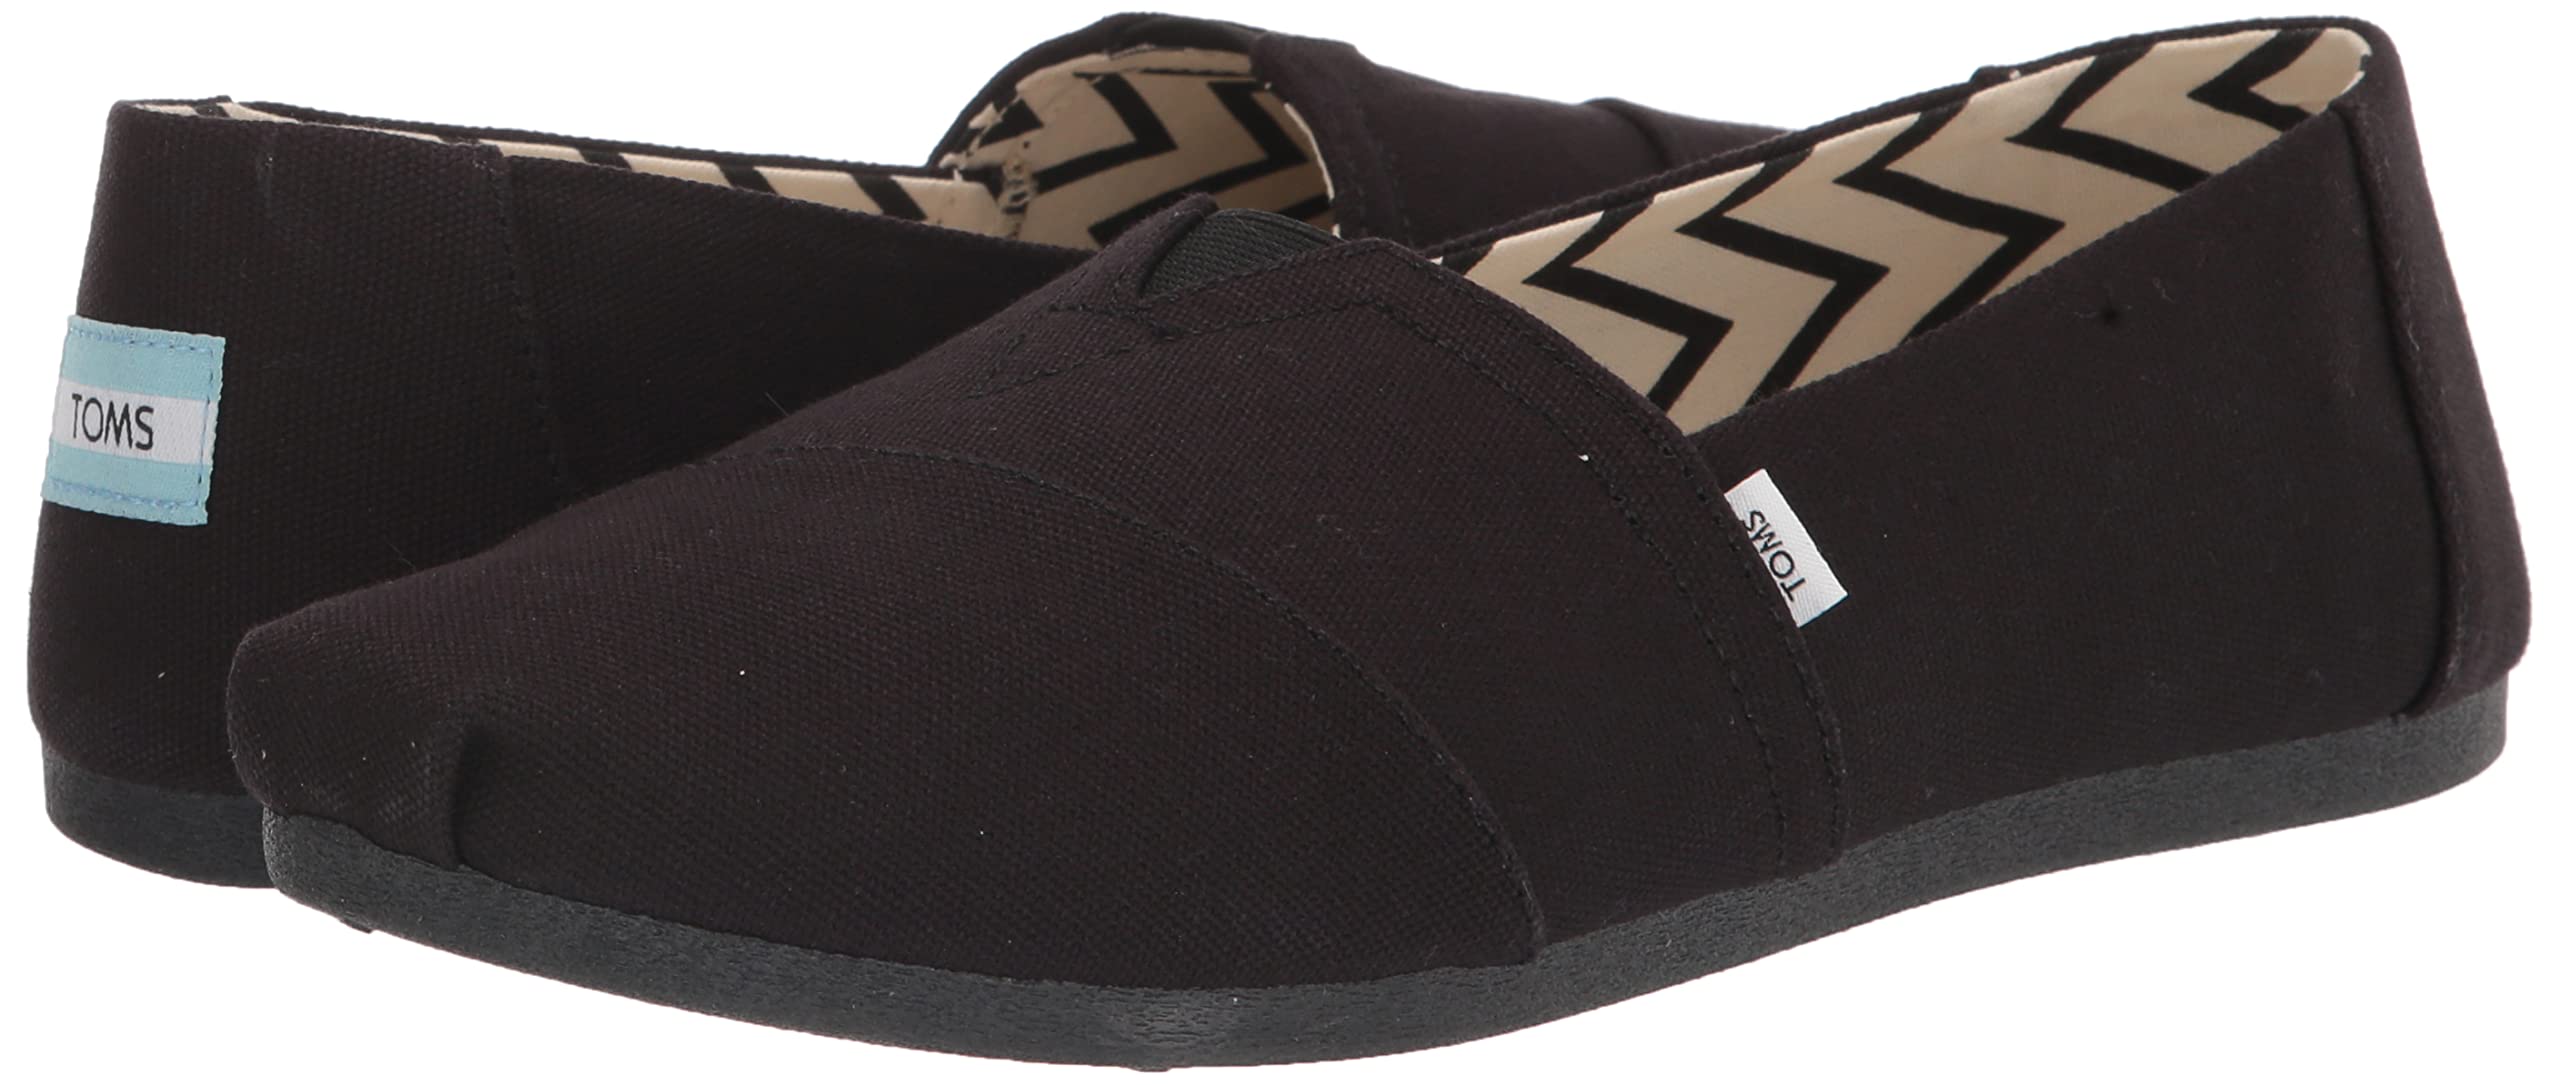 TOMS Women's Alpargata Recycled Cotton Canvas Loafer Flat, Black, 5